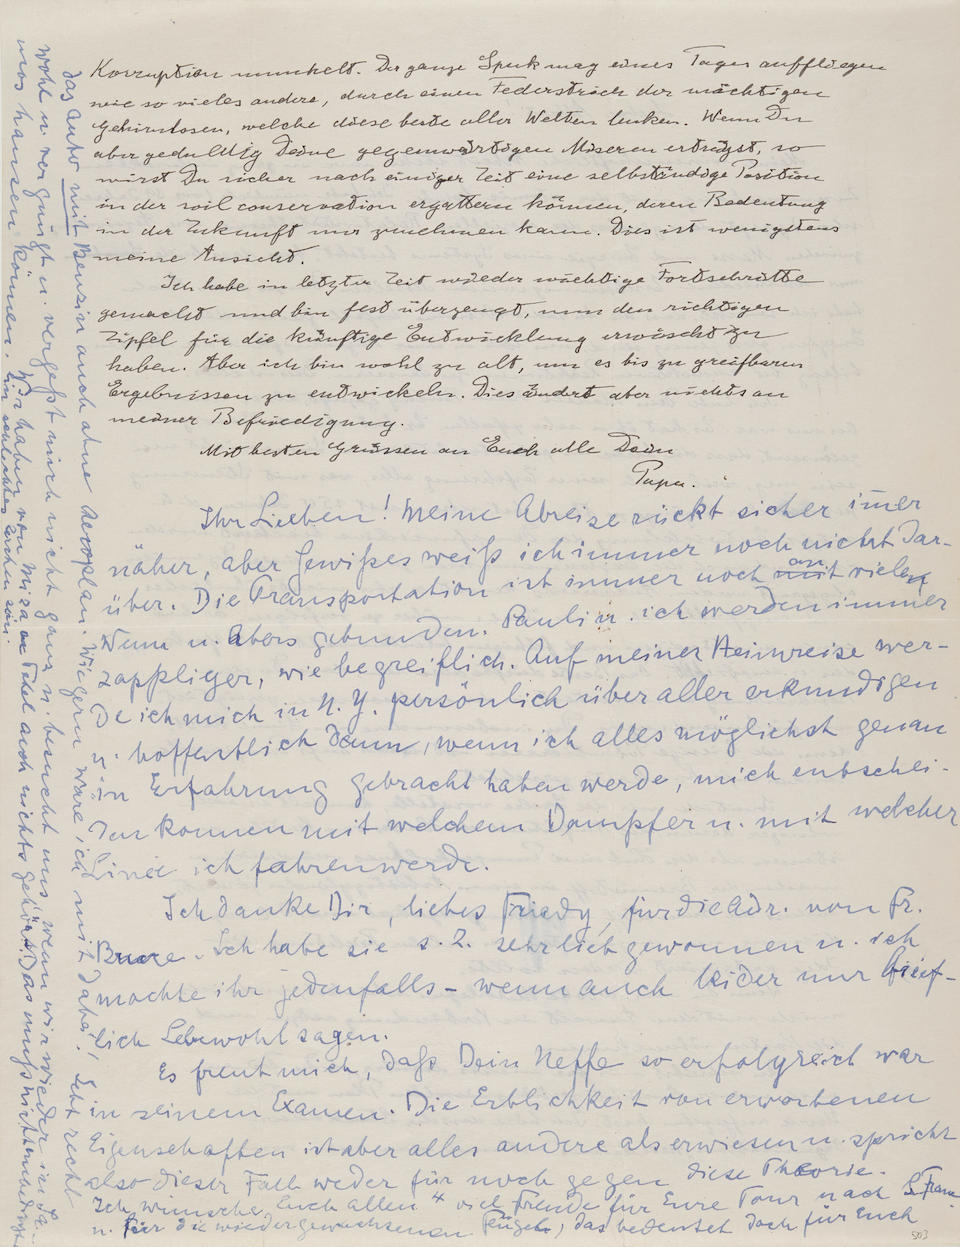 EINSTEIN, ALBERT. 1879-1955. Autograph Letter Signed ("Papa"), 2 pp recto and verso, 4to (280 x 215 mm),